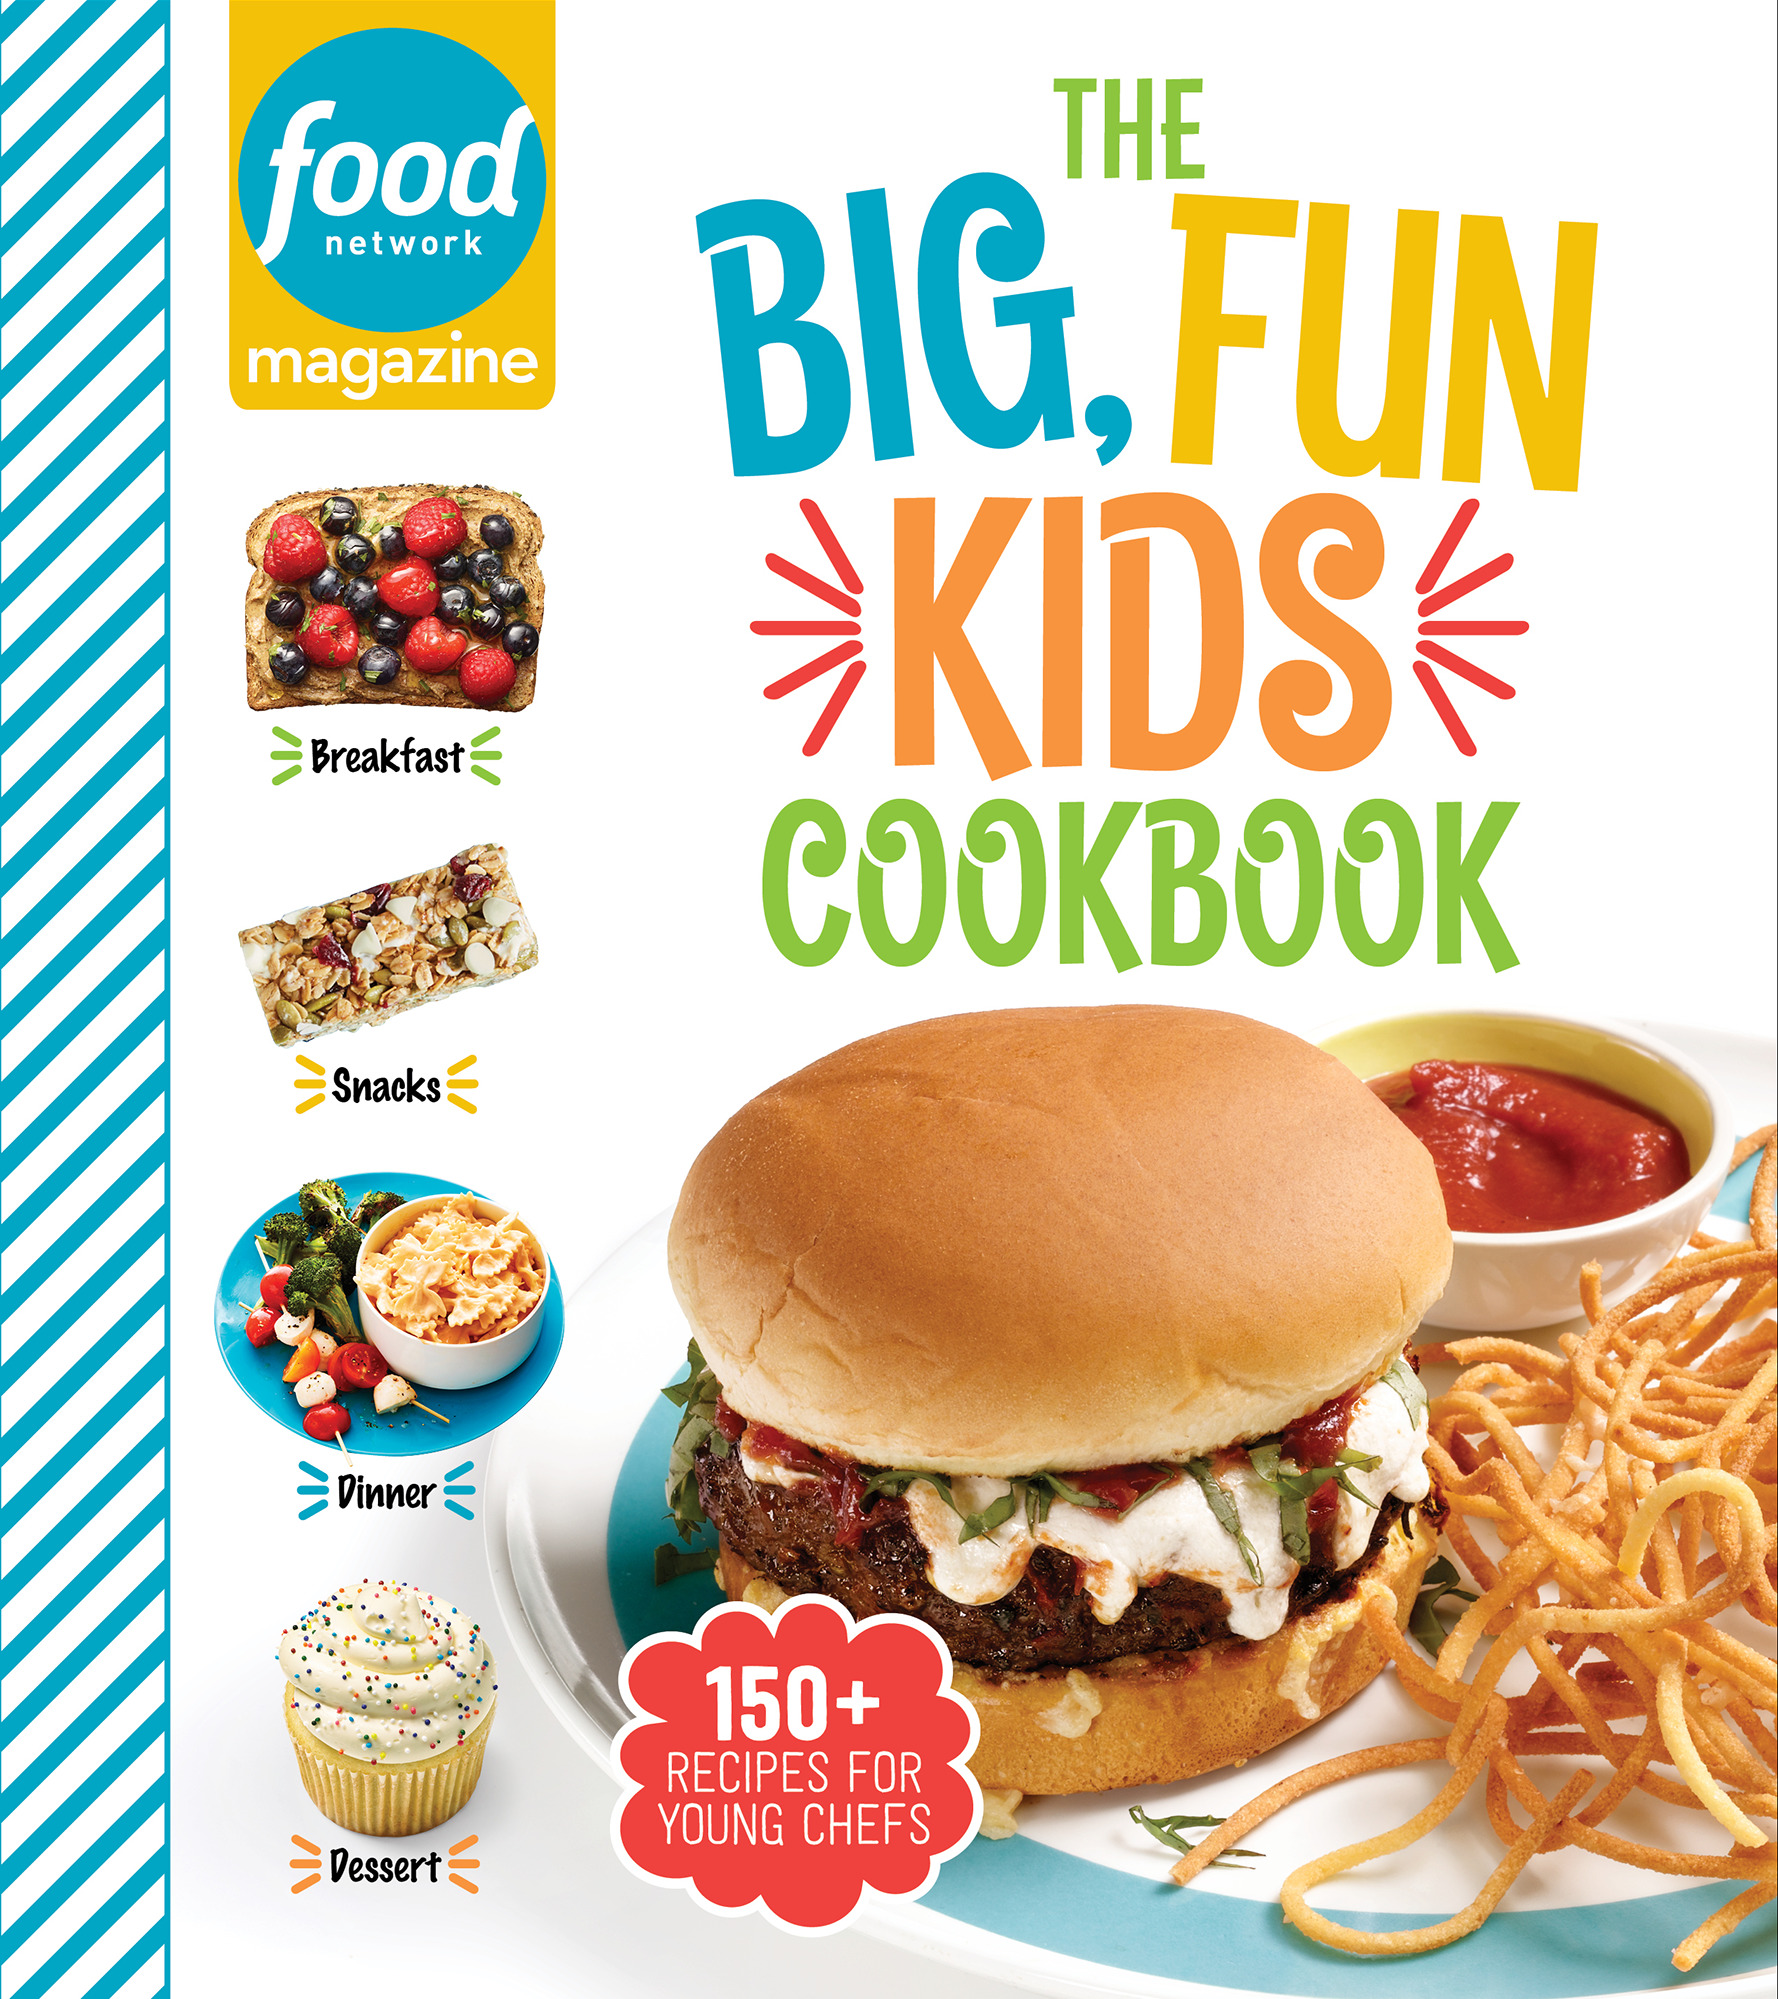 Food Network Magazine The Big, Fun Kids Cookbook : 150+ Recipes for Young Chefs | 